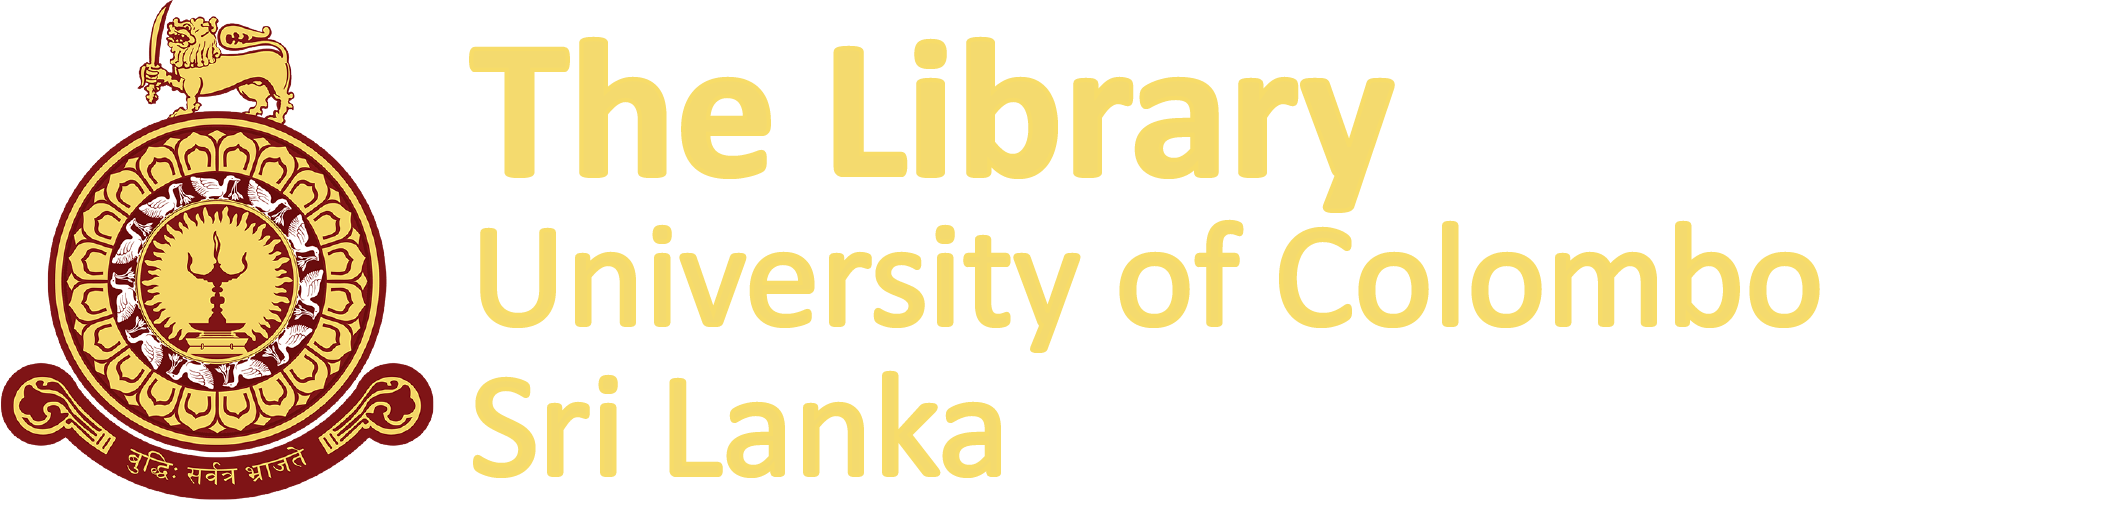 Two-day workshop on “New Trends of the University Libraries” | Library